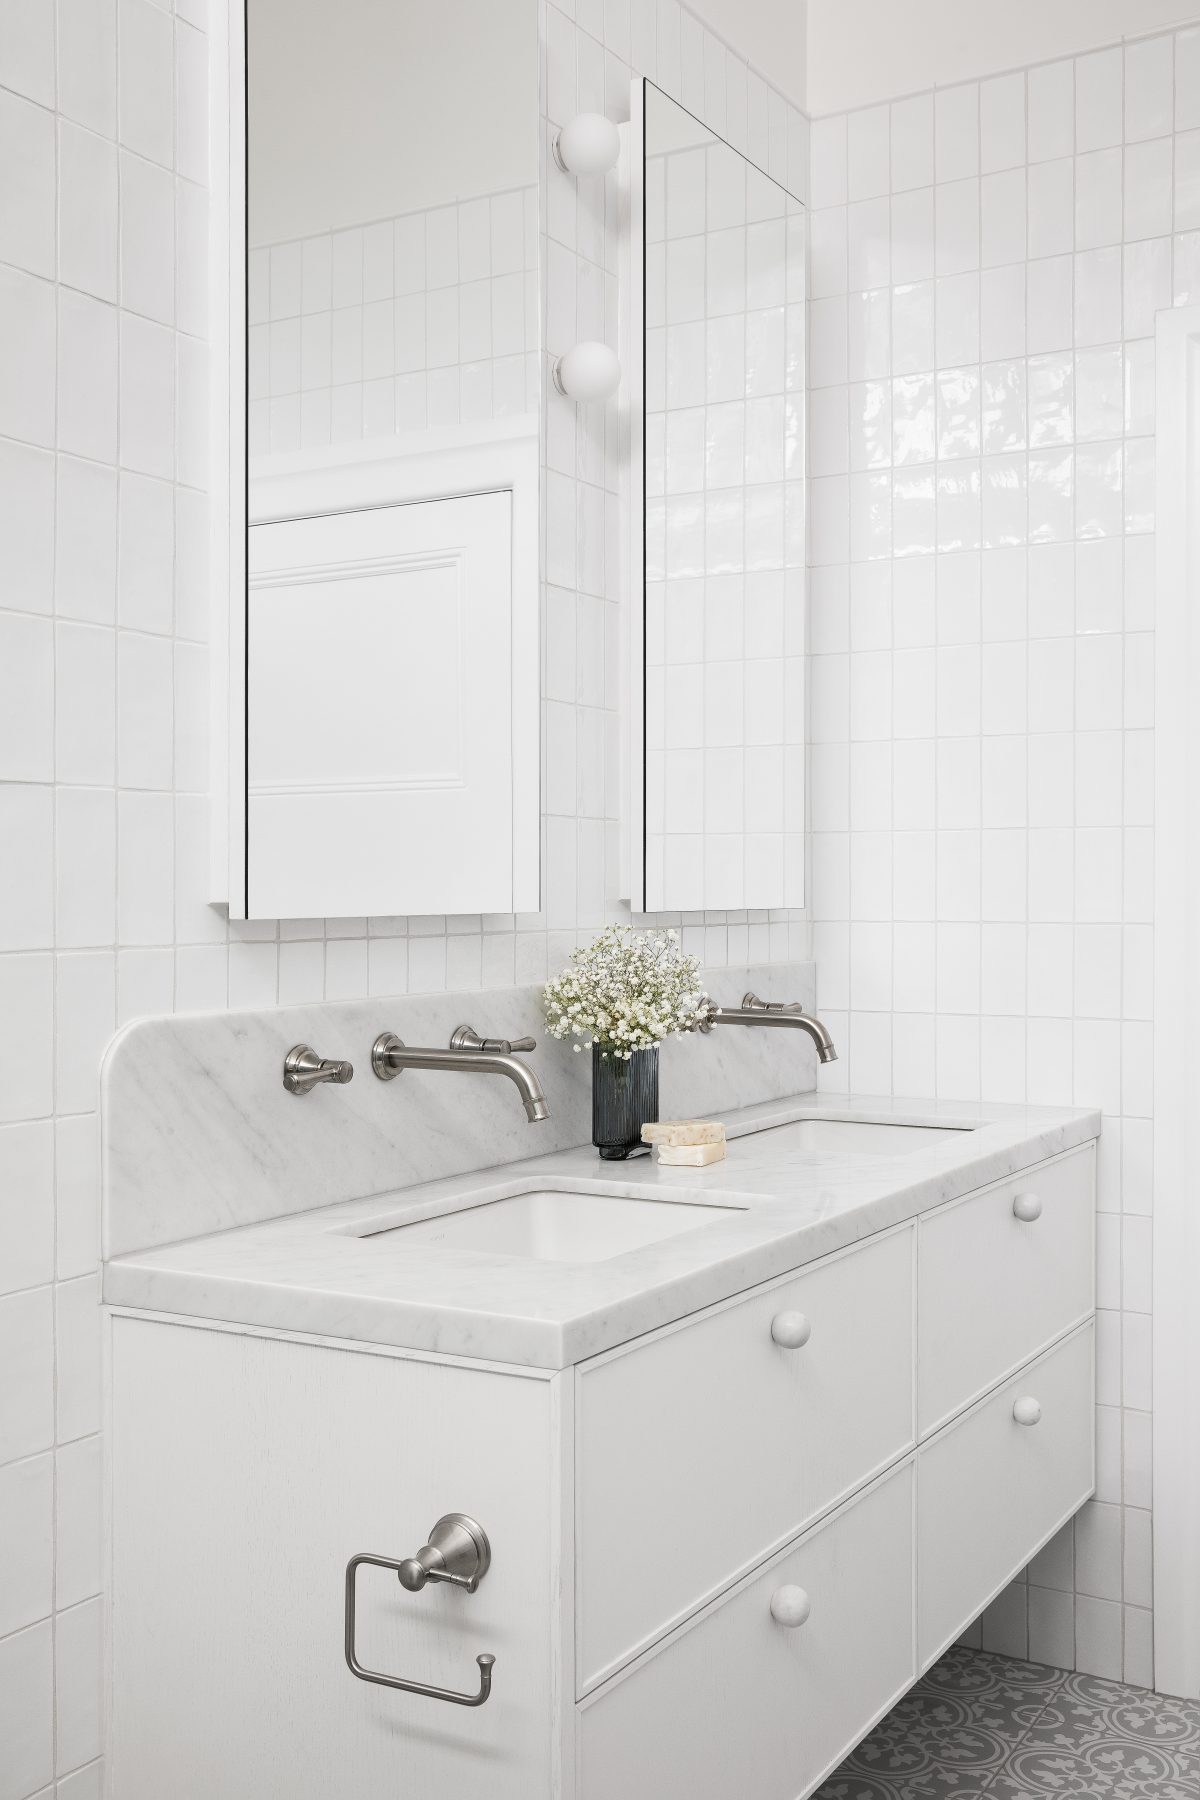 A custom designed bathroom featuring Spanish Handmade White Gloss tiles and a Carrara Marble bench top. Designed and built by MJ Harris Group.